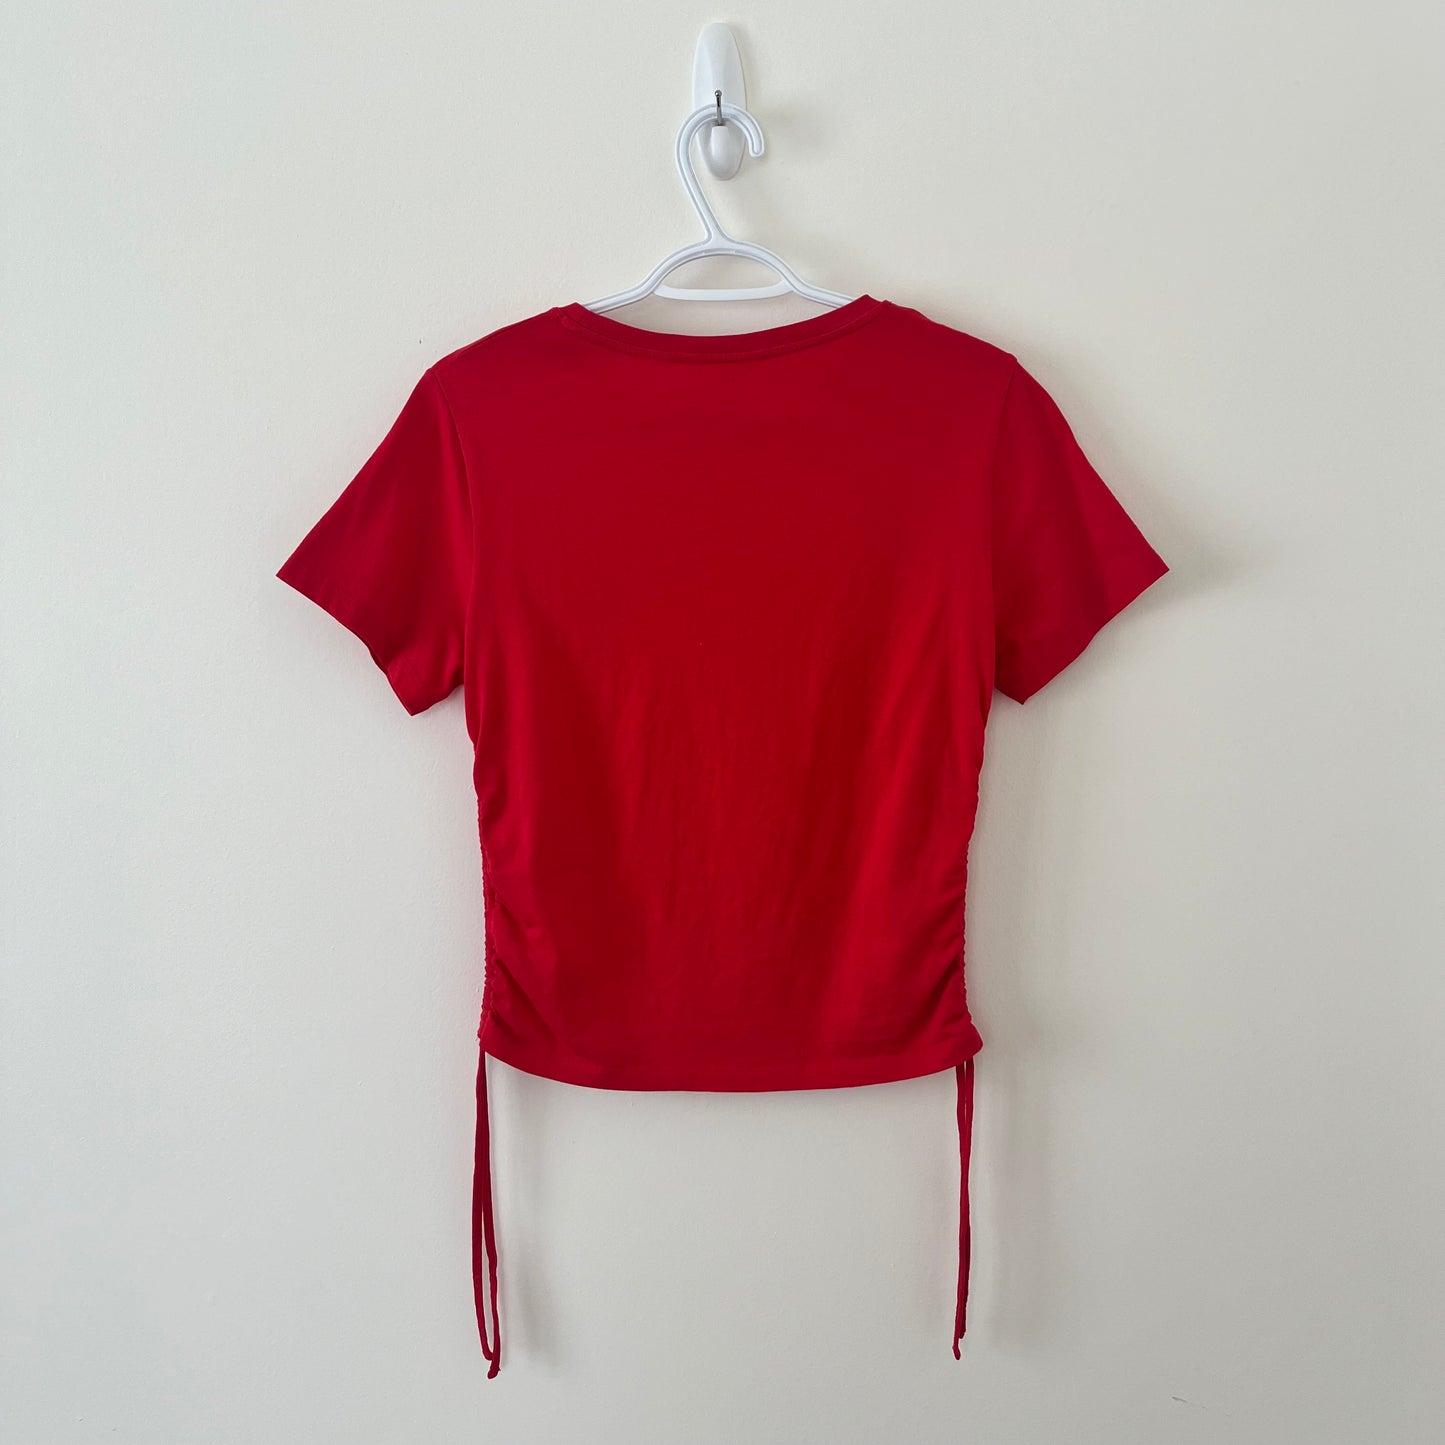 Red Tee with Adjustable Sides (S)